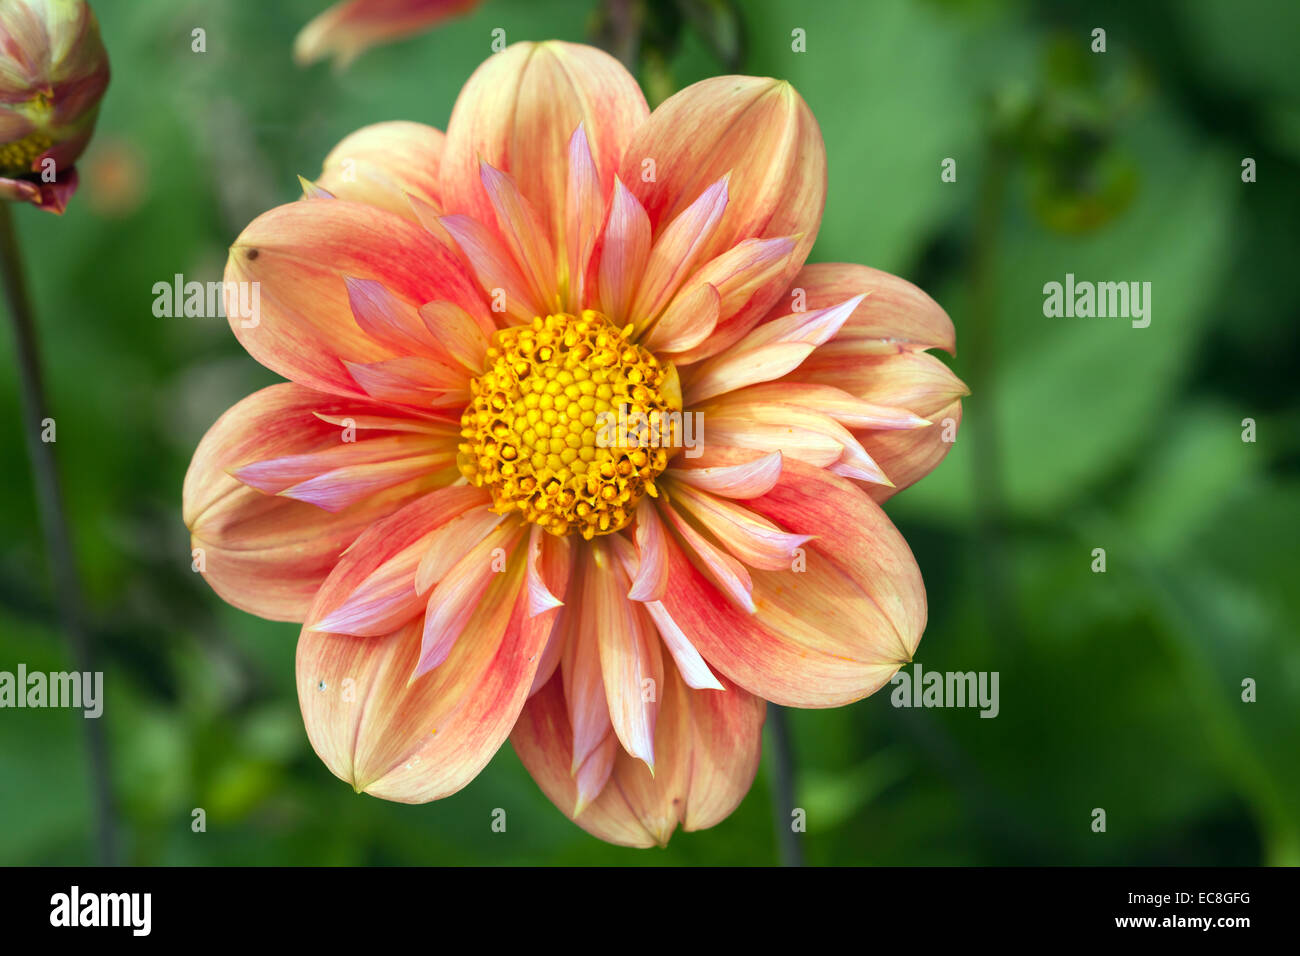 Close-up image of  single Carstone firebox flower, a Collerette type Dahlia. Stock Photo